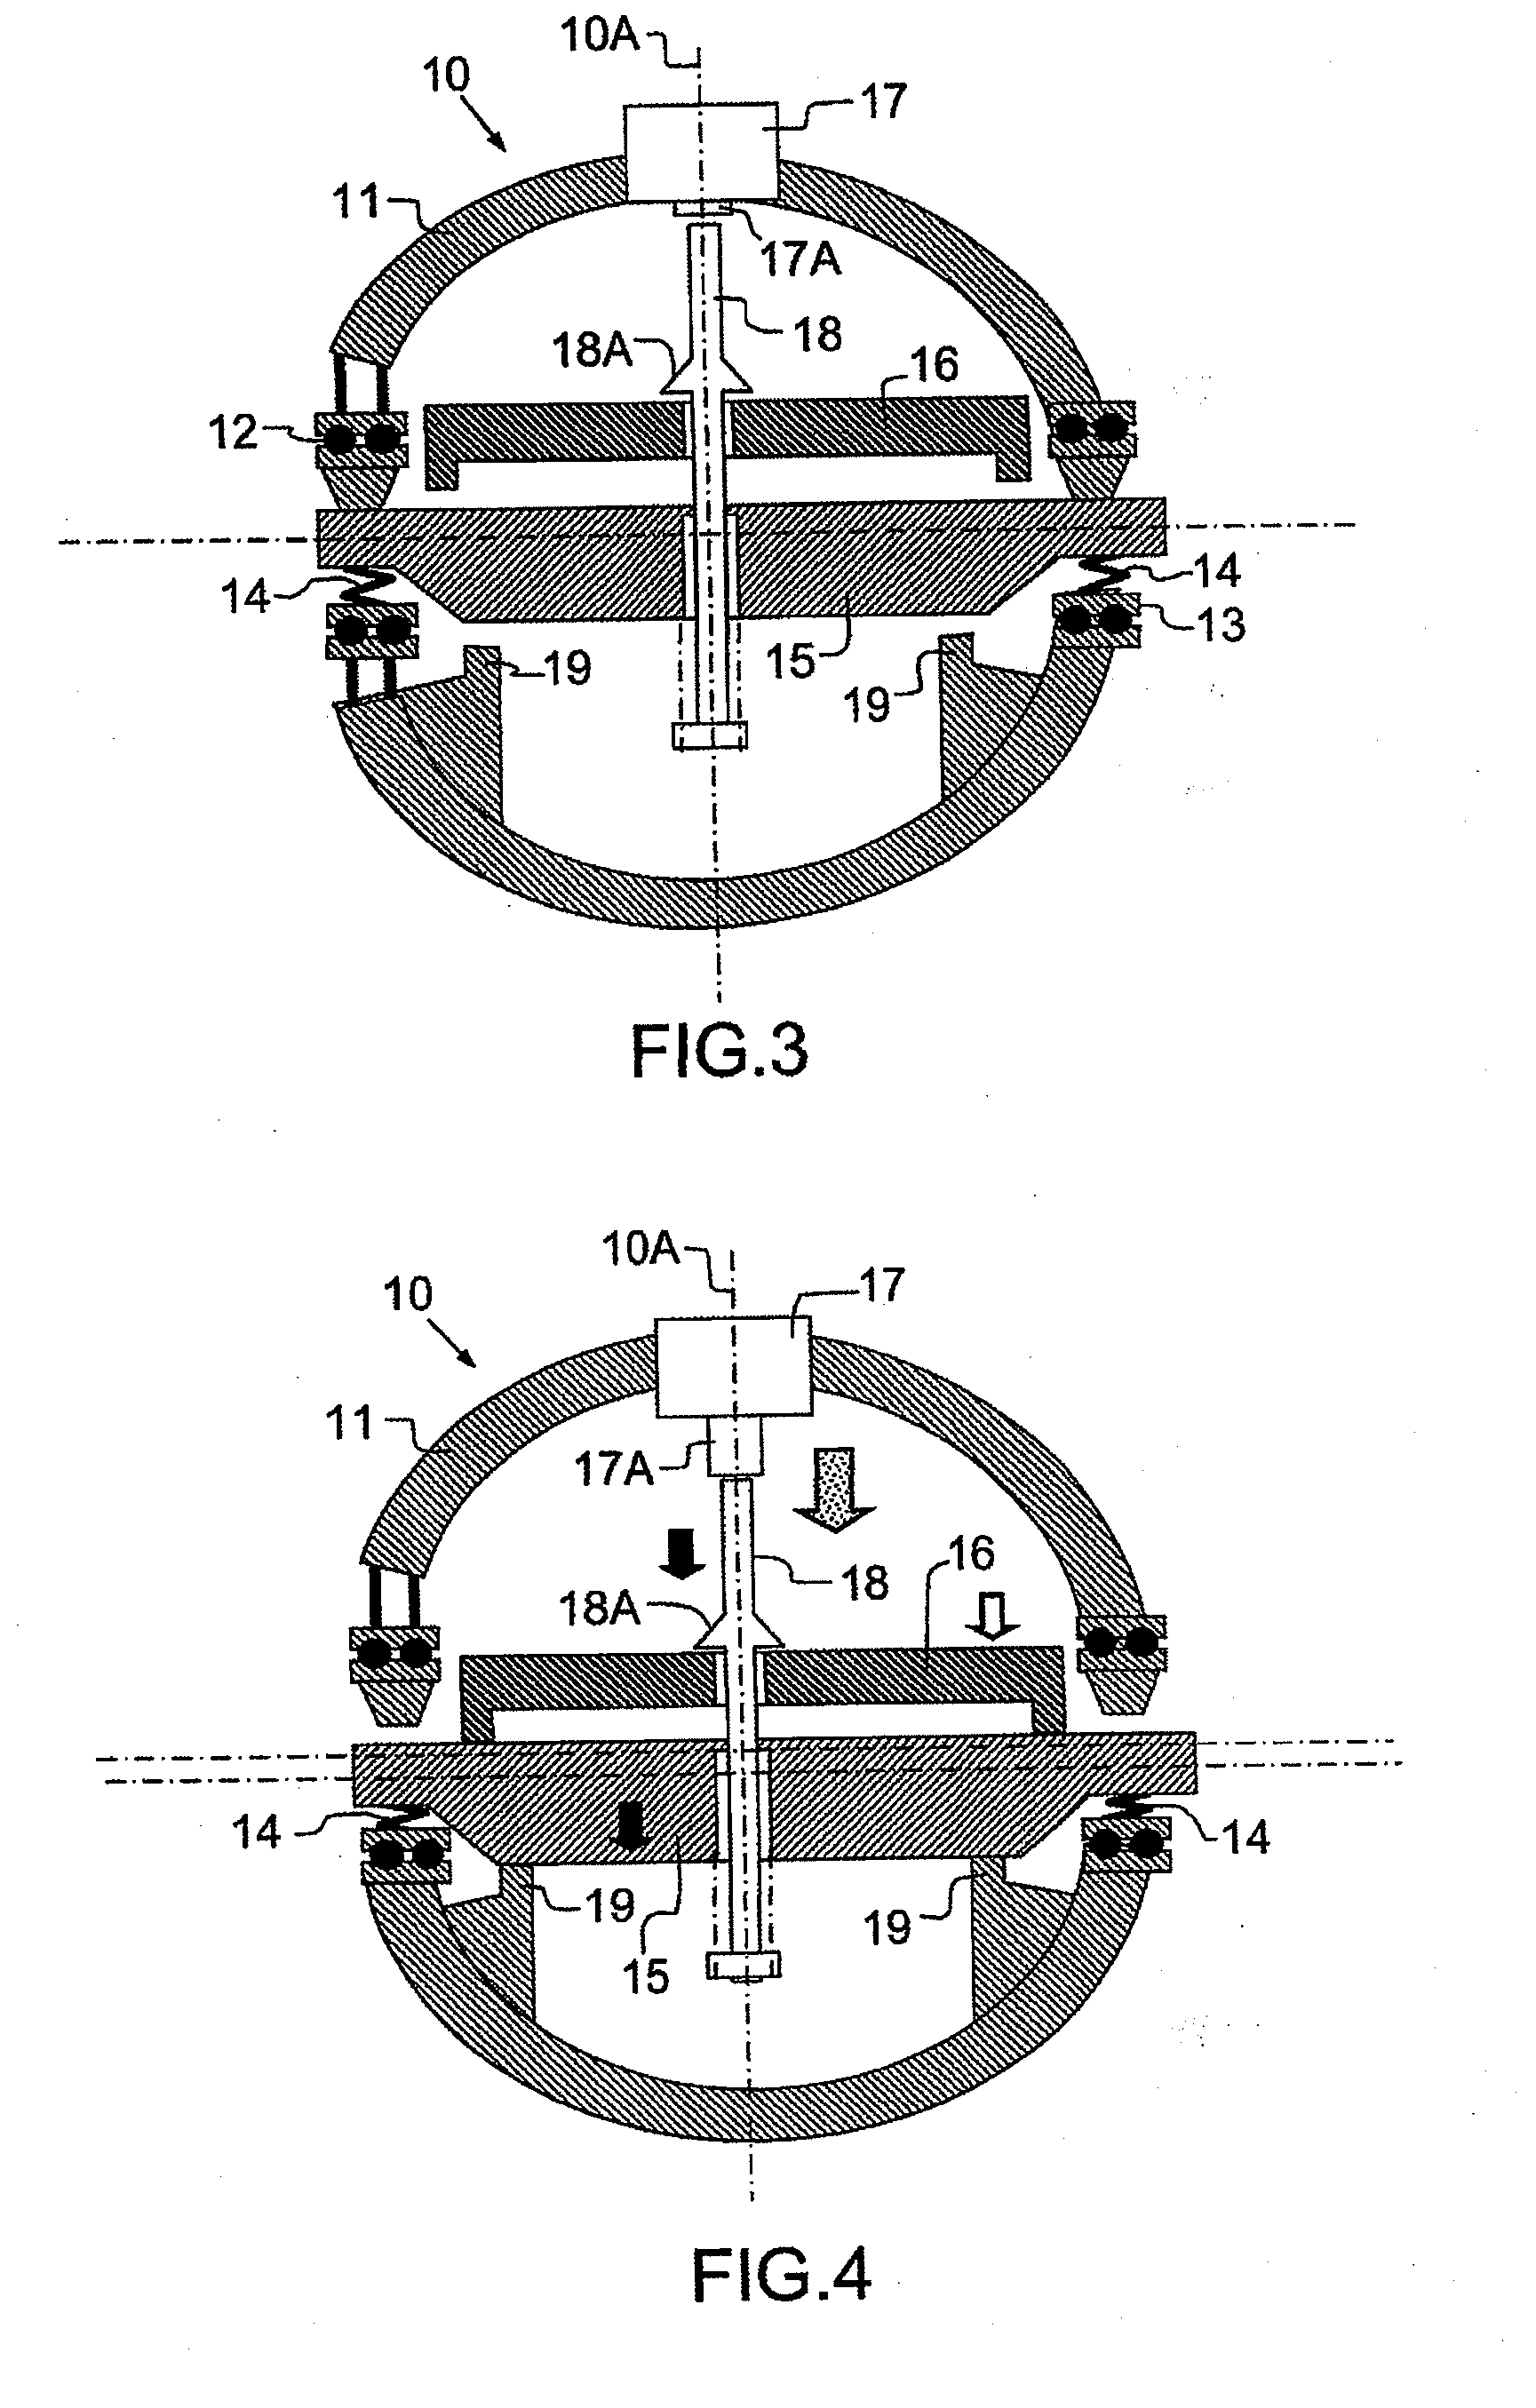 Reusable device for holding at least one moving object securely autonomously and without shocks, for spacecraft